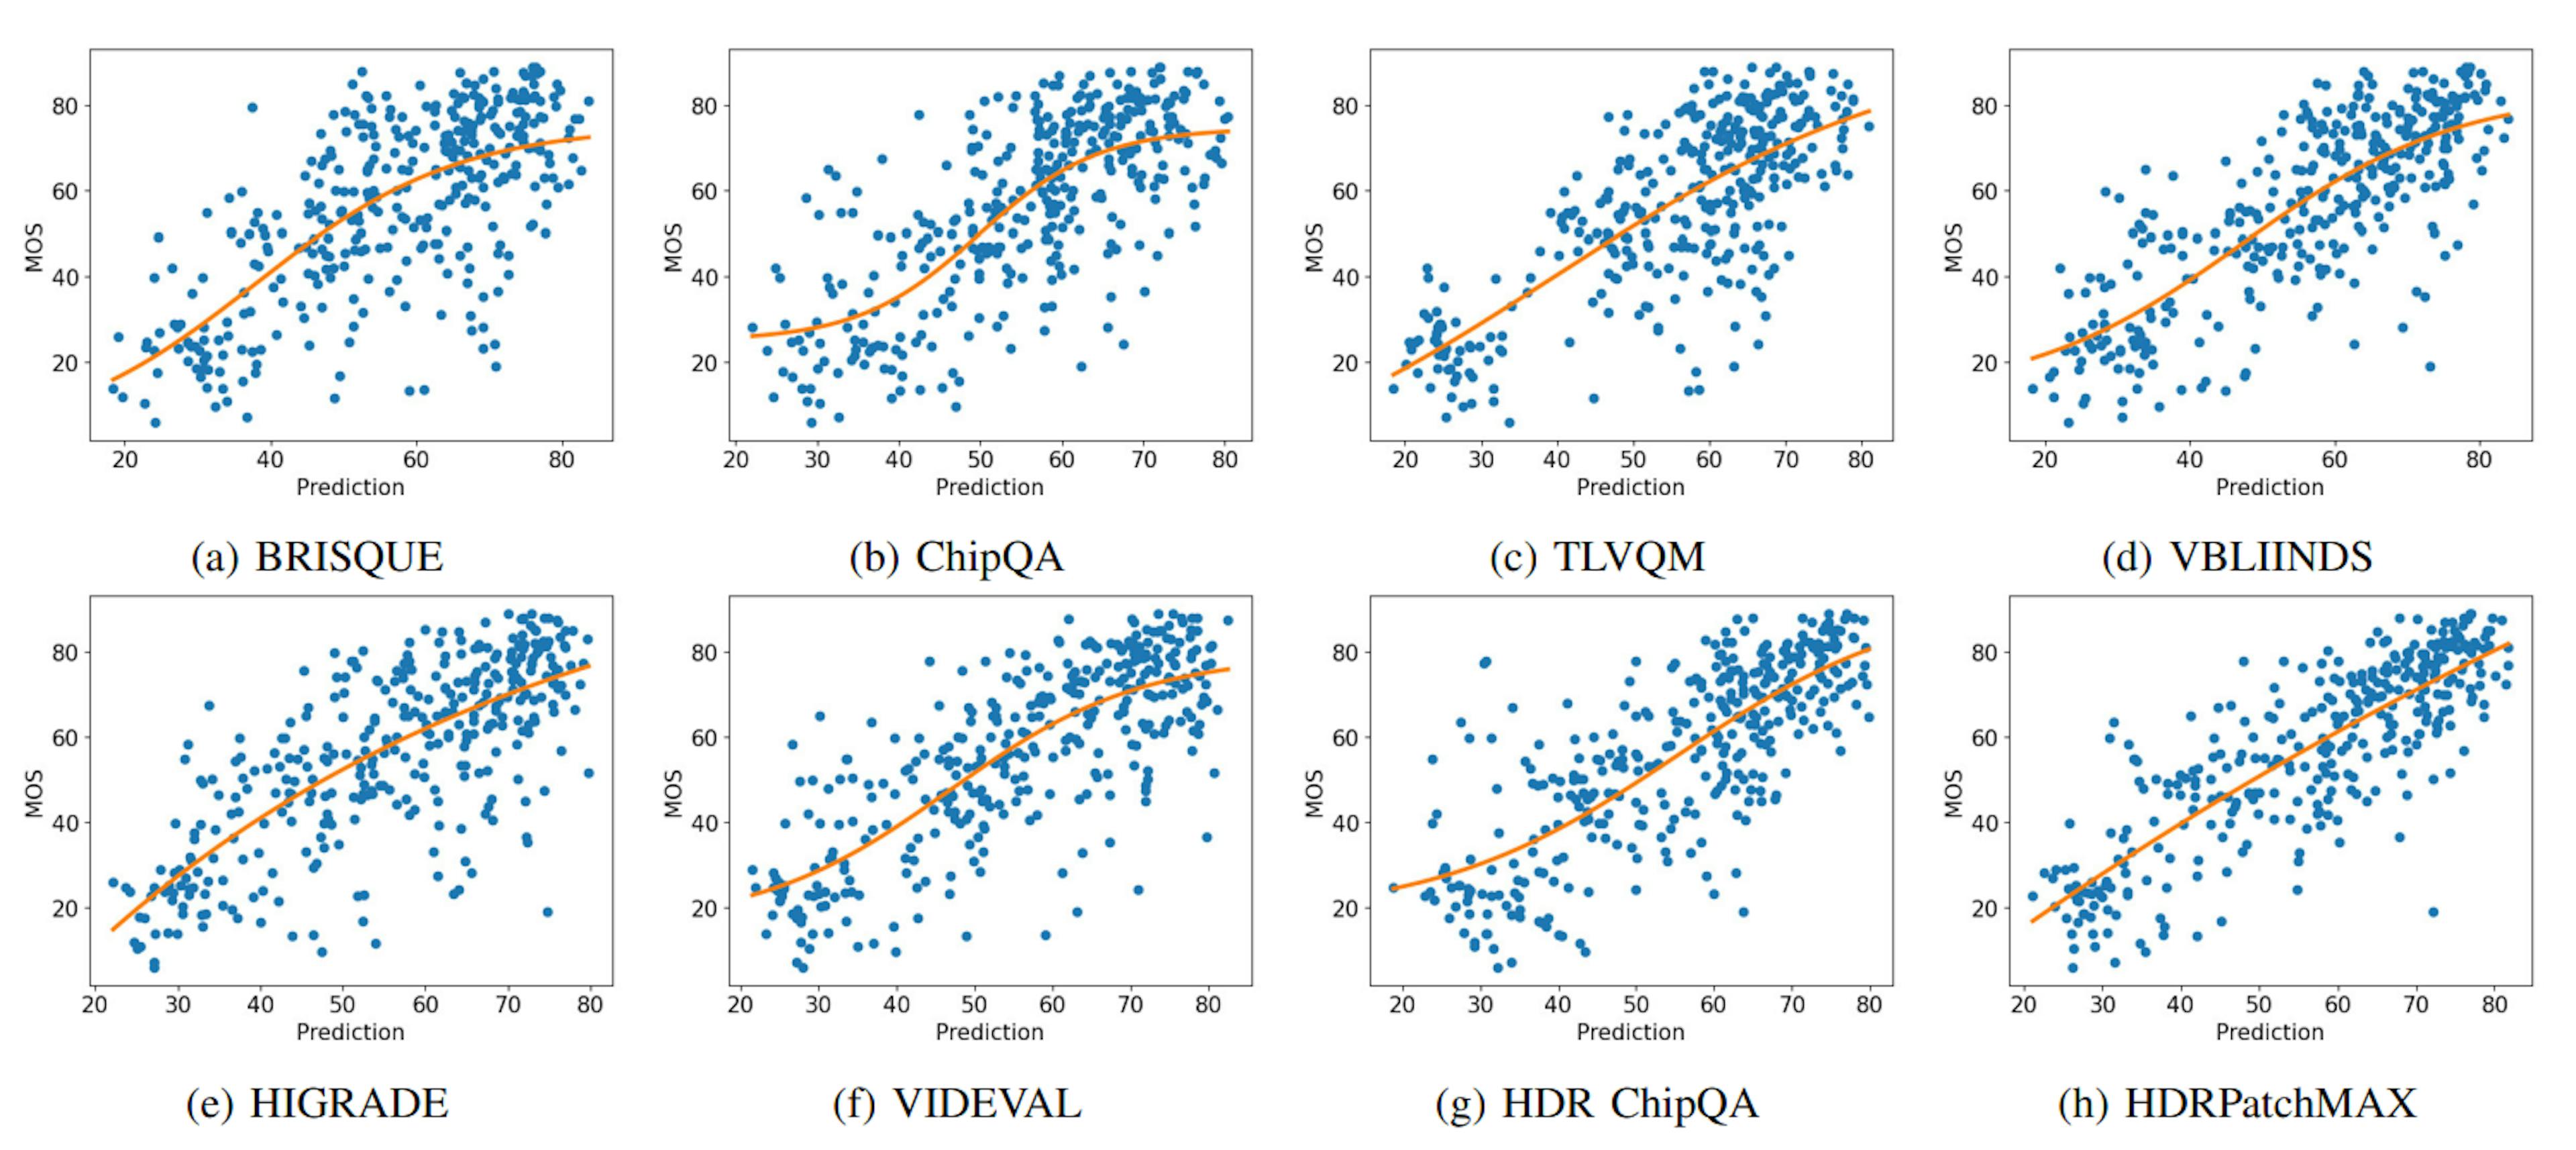 Fig. 10: Scatter plots of MOS against NR VQA predictions with logistic fit in orange.